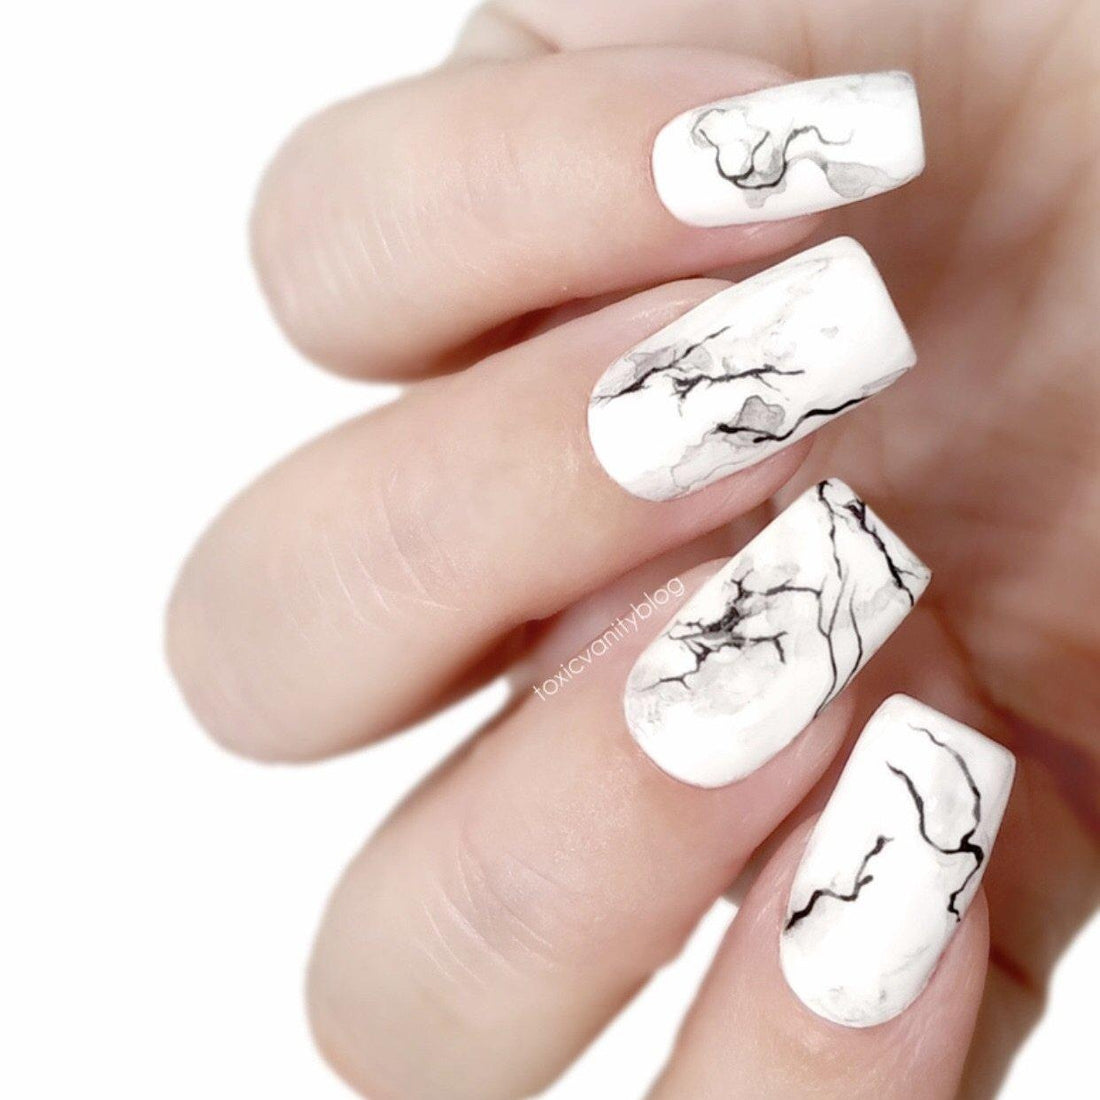 Crackle Pattern On White Nail Polish High-Res Stock Photo - Getty Images